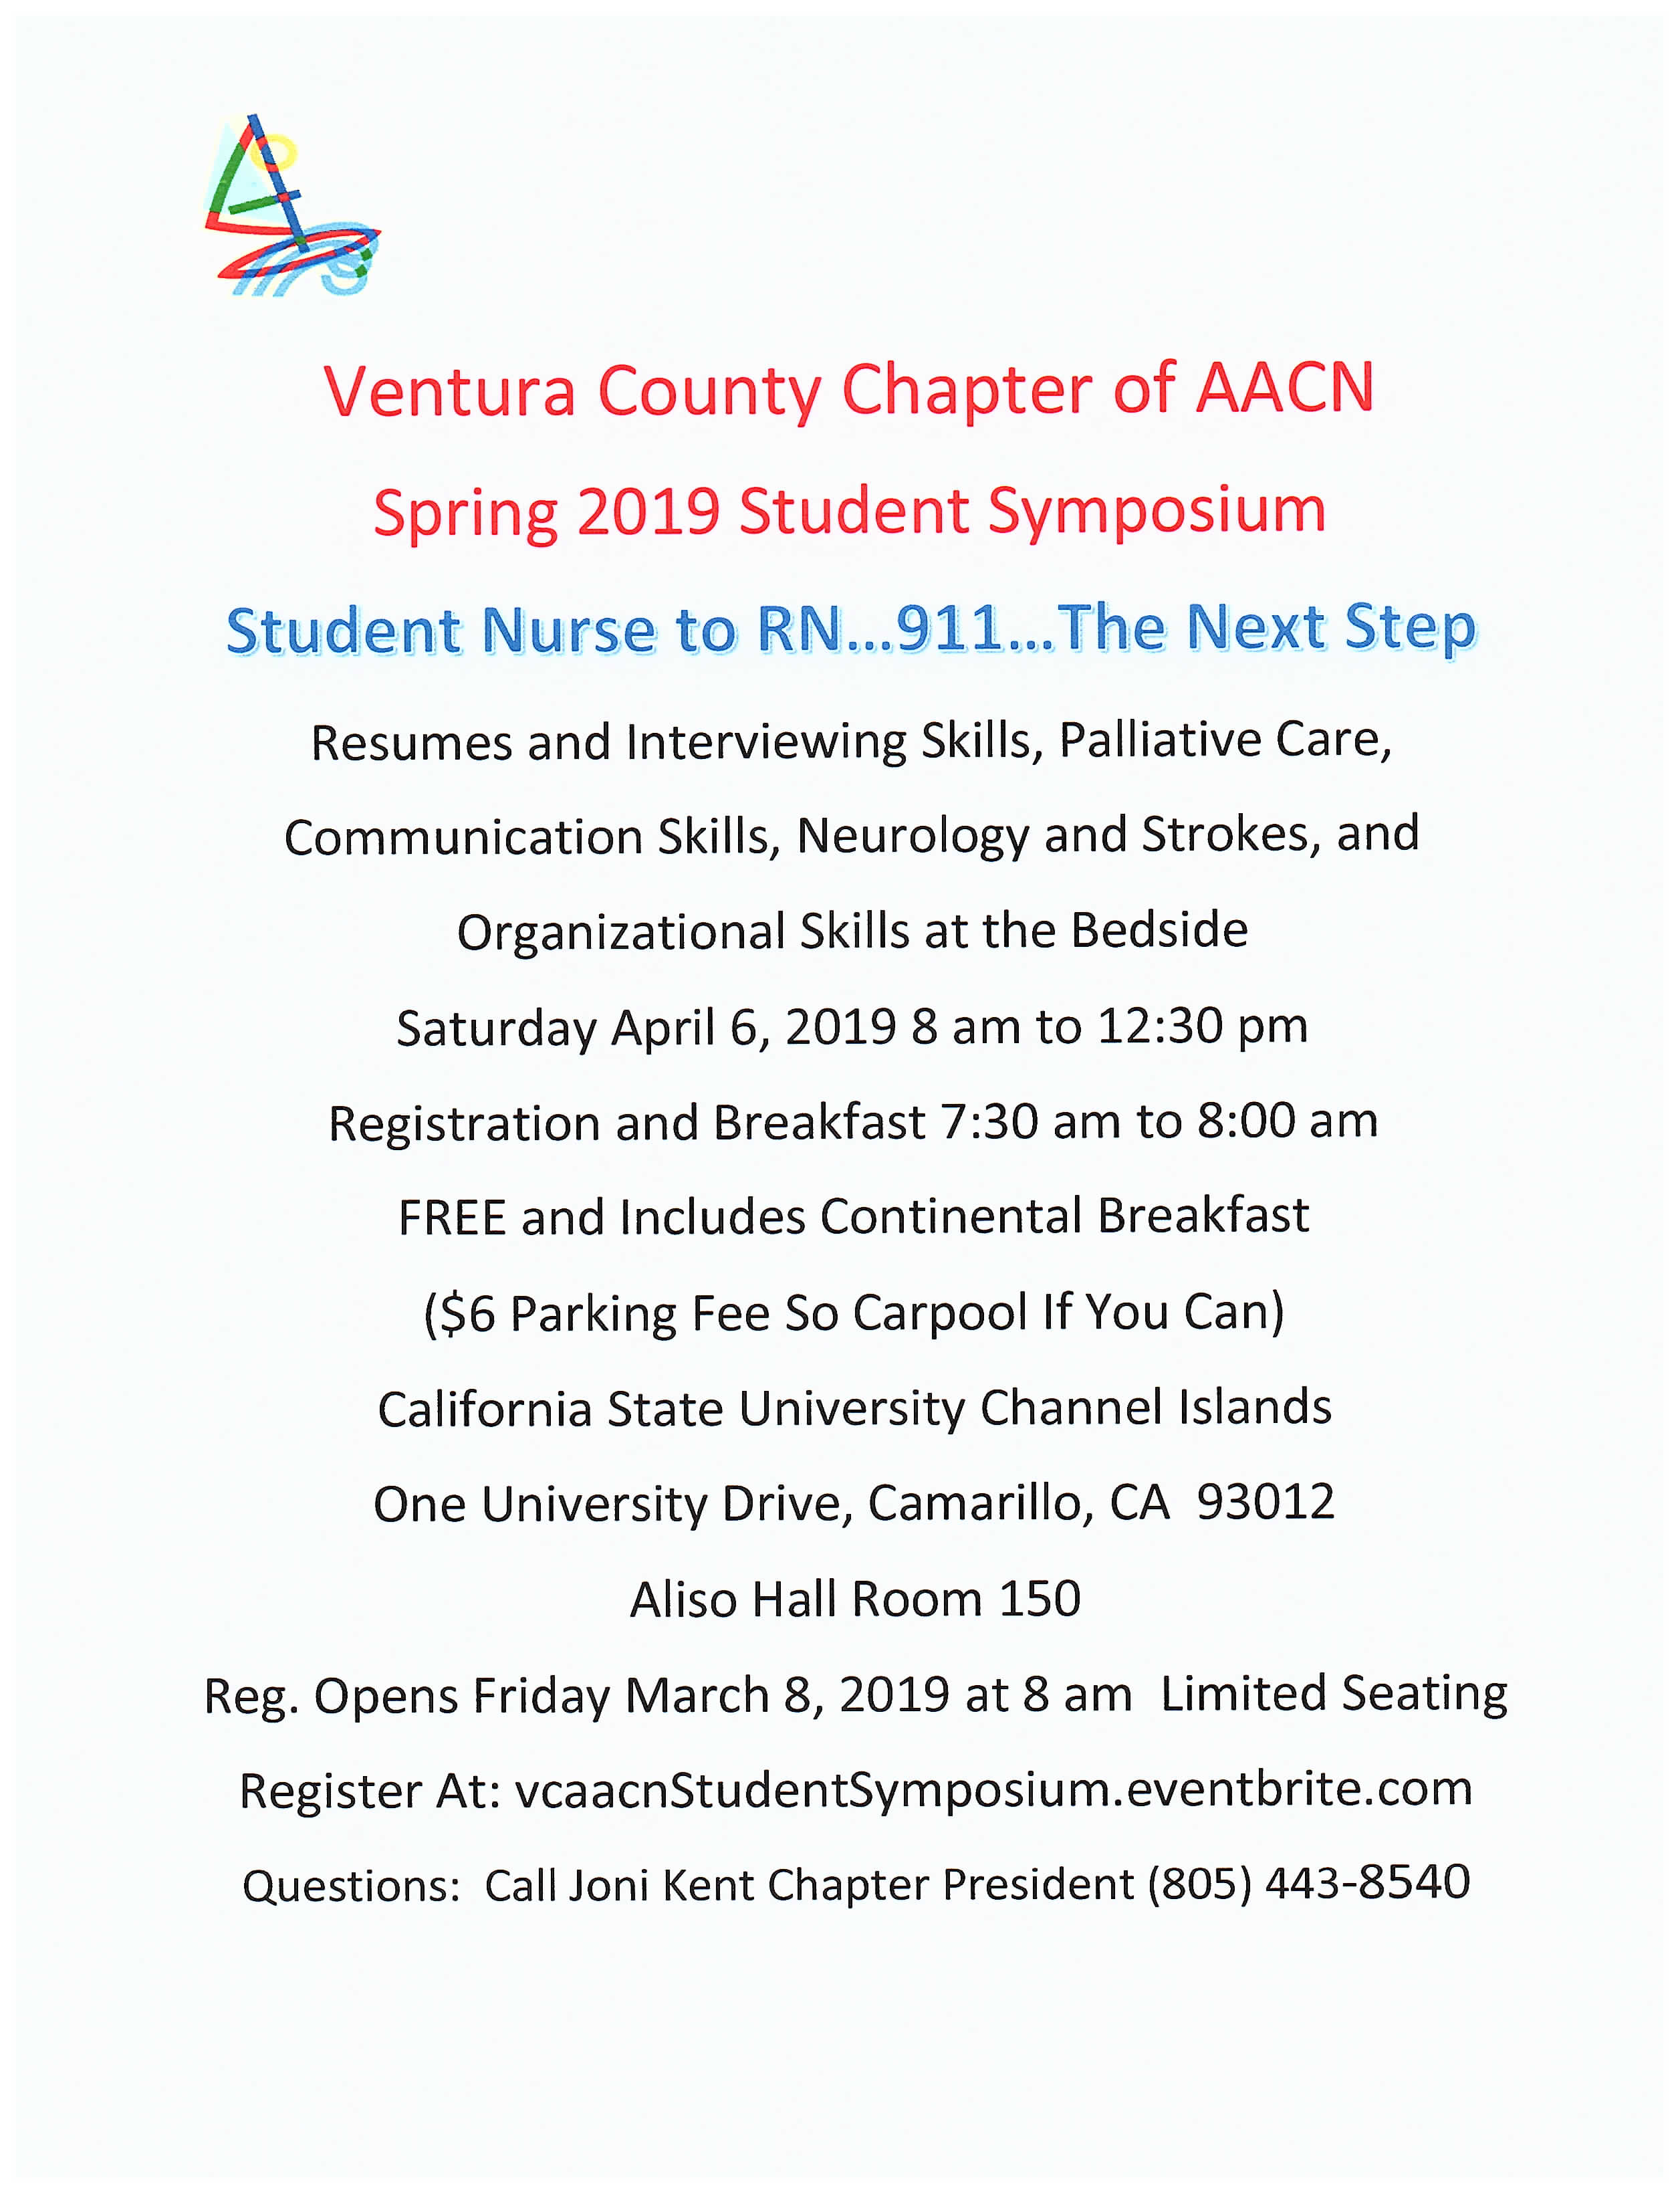 Ventura Chapter AACN Conference to be held on April 6, 2019